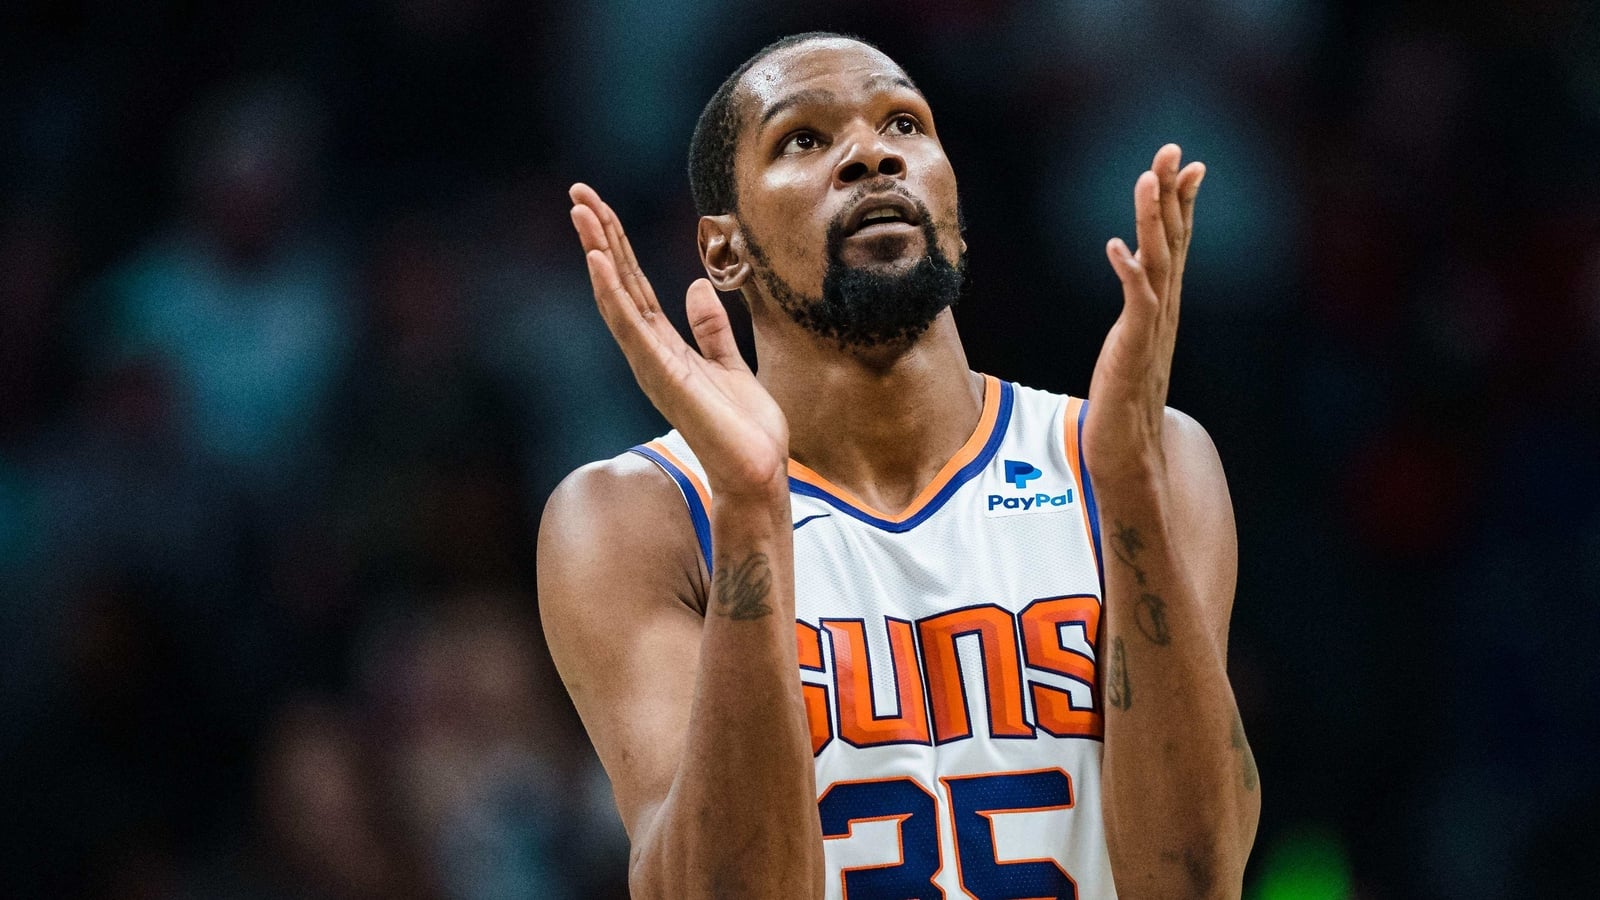 Durant shines in Suns debut with 23 points, helps secure victory over Hornets